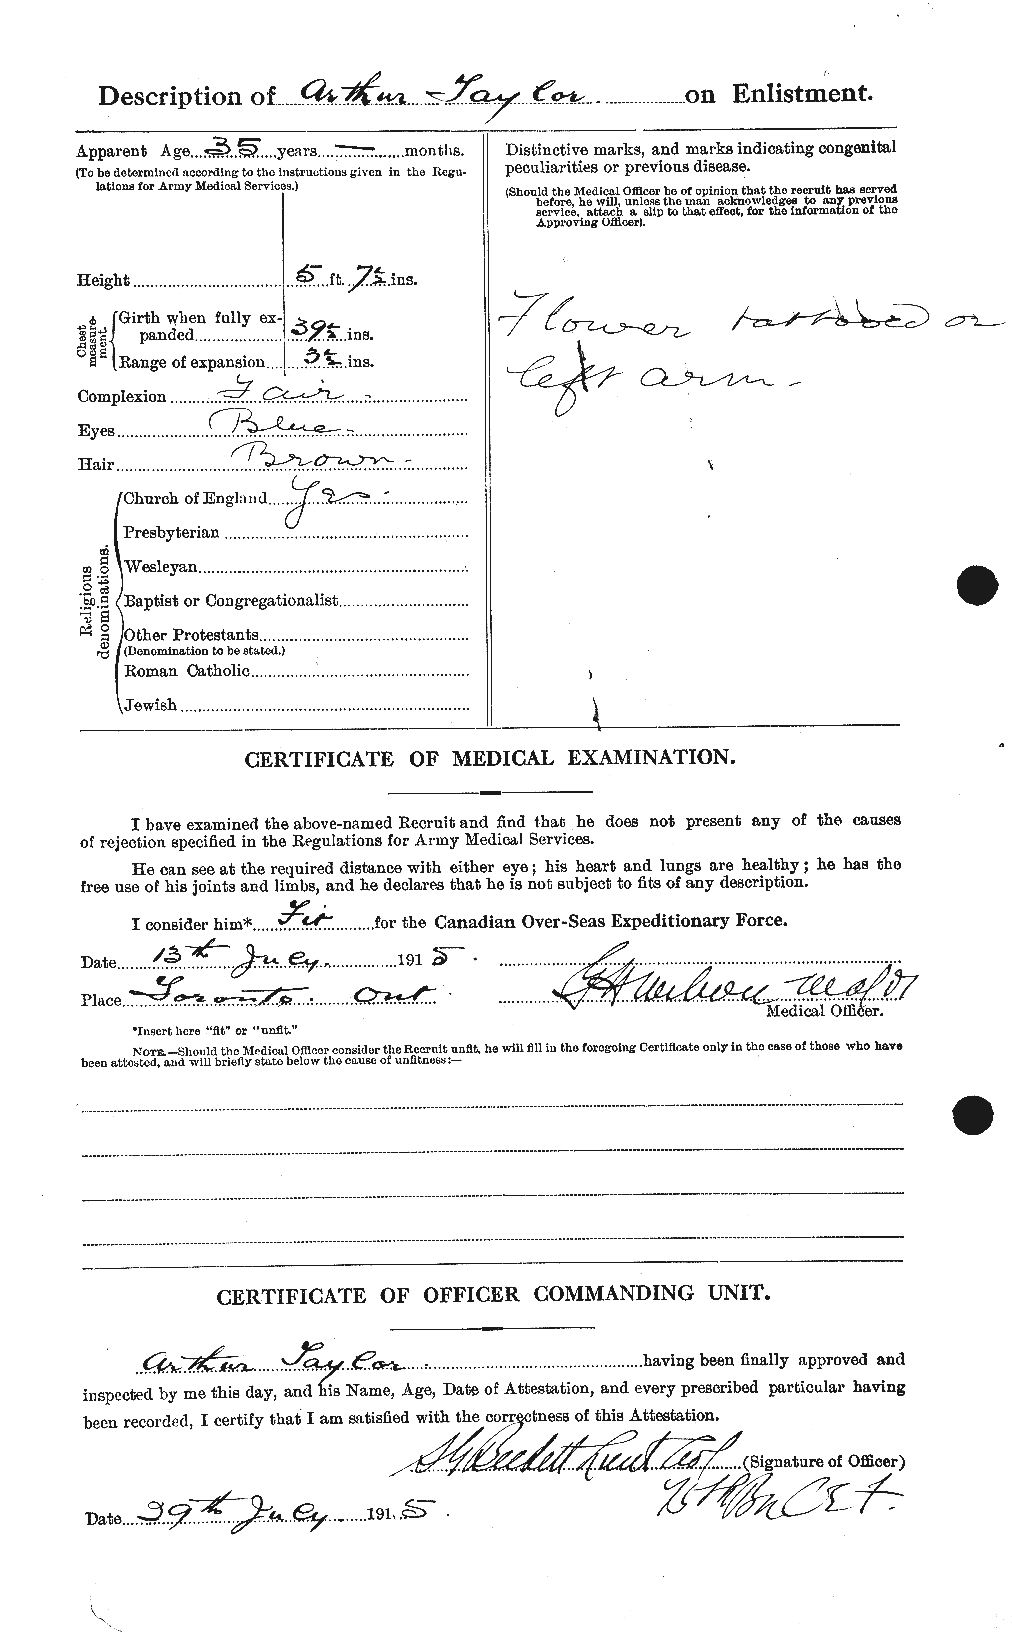 Personnel Records of the First World War - CEF 626702b